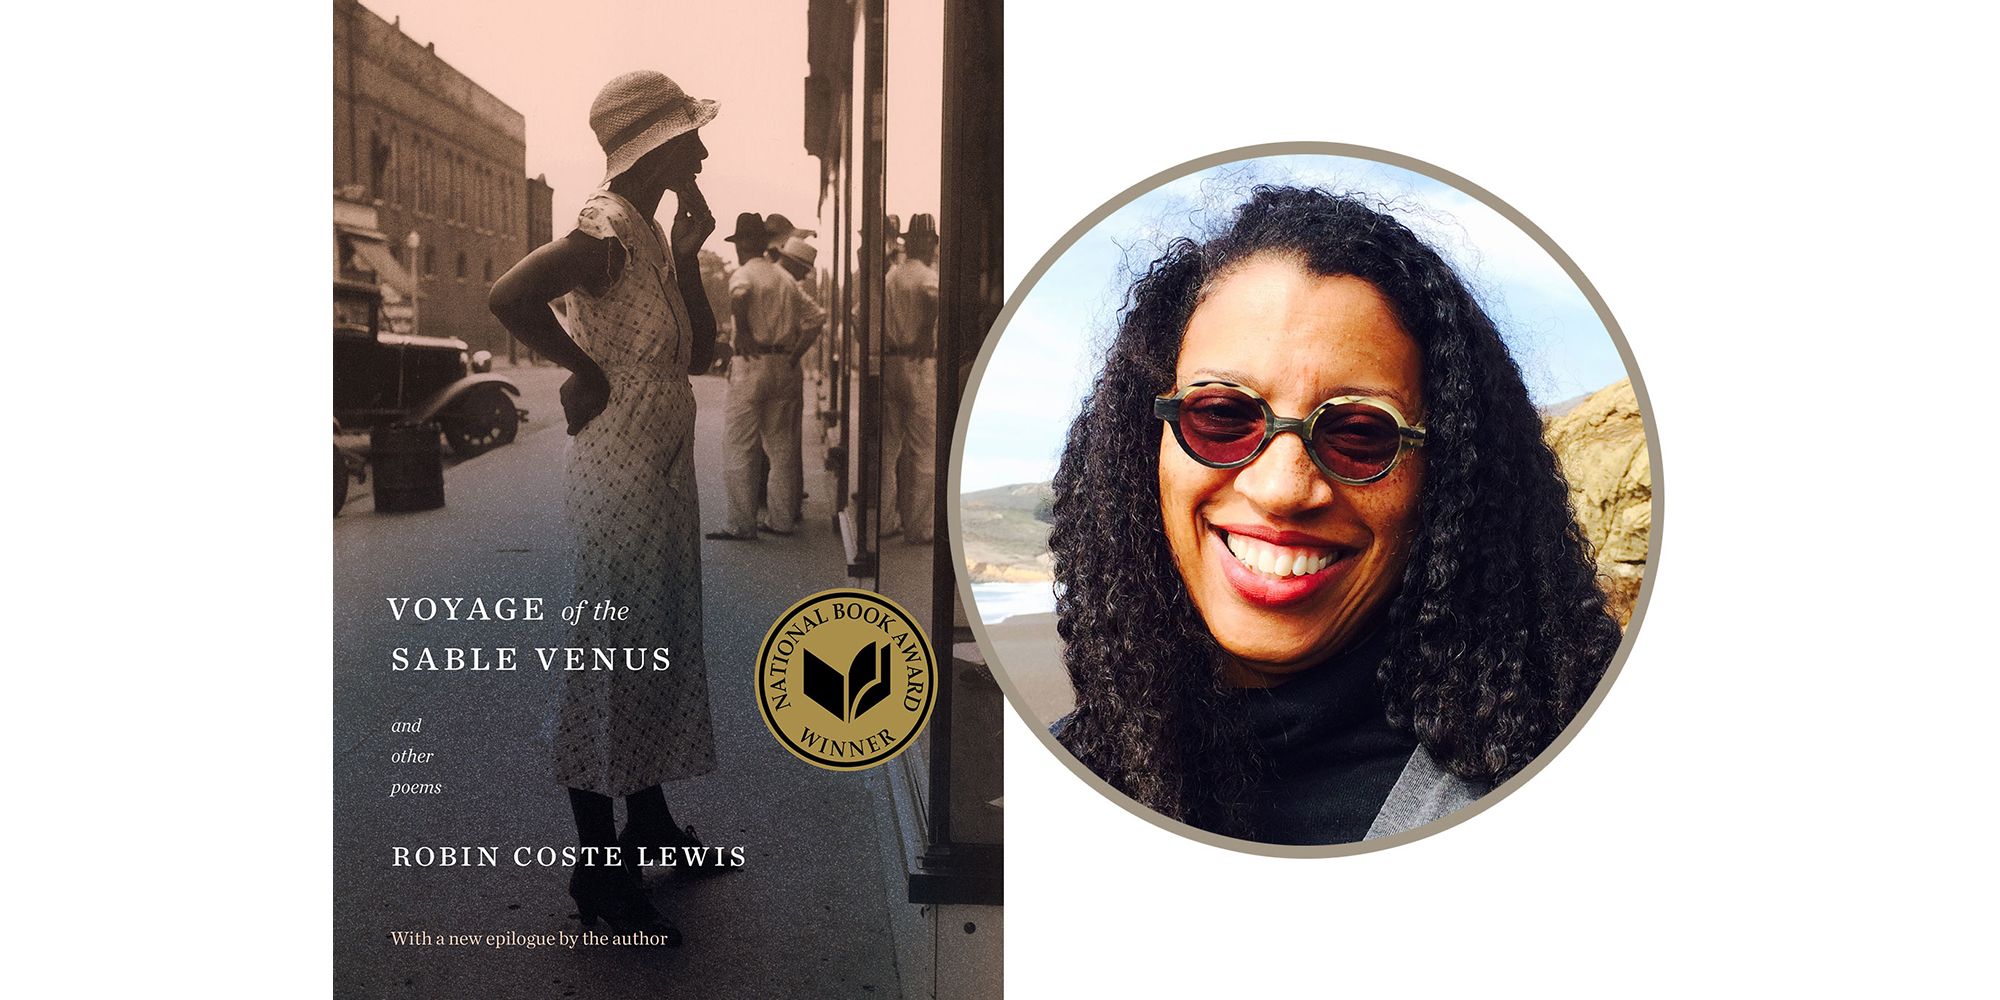 Voyage of the Sable Venus and Other Poems by Robin Coste Lewis